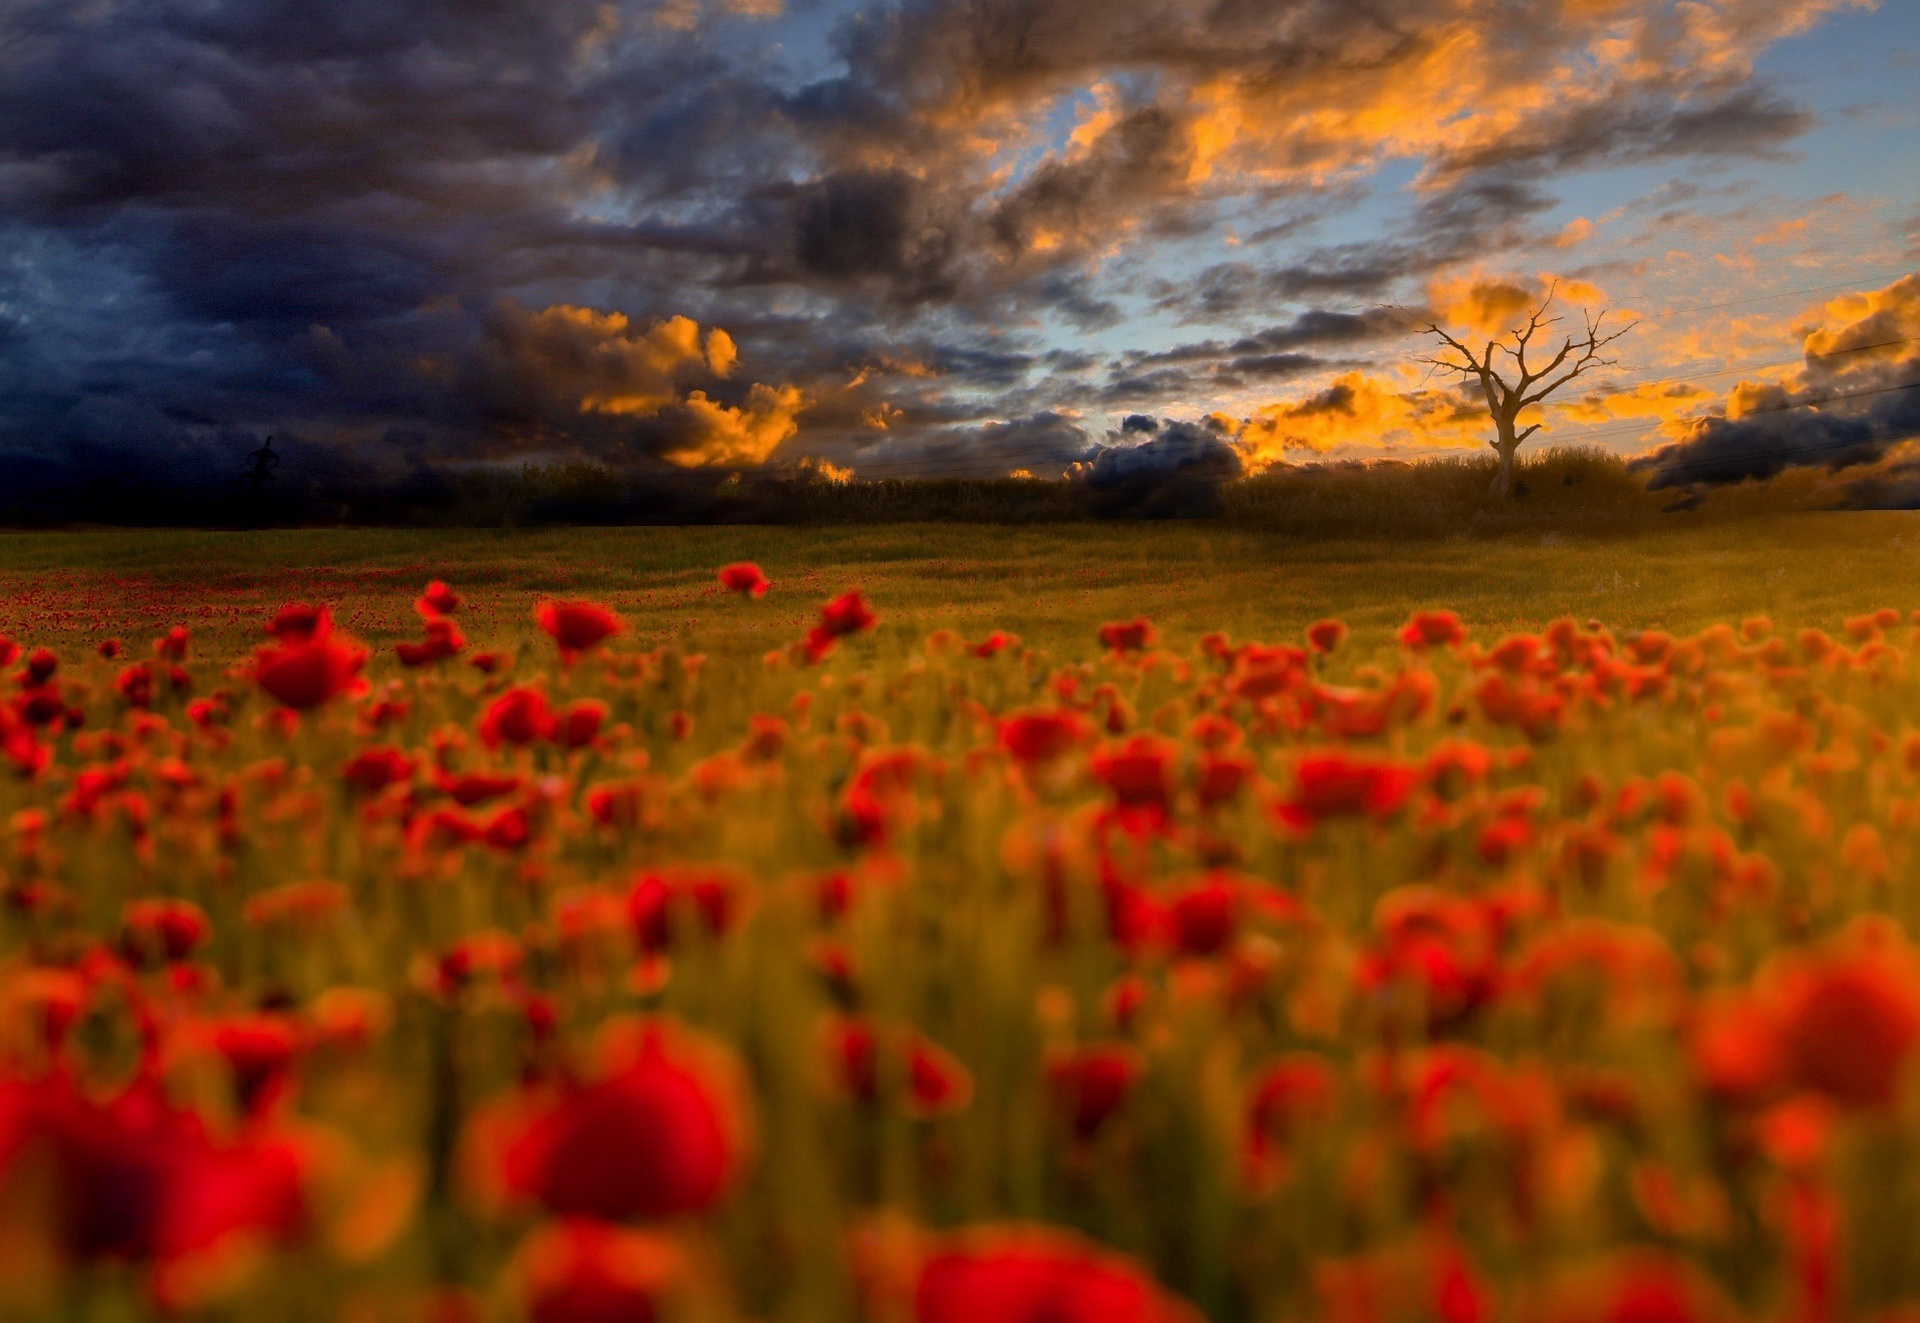 General 1920x1323 outdoors field flowers red flowers plants clouds sunlight nature